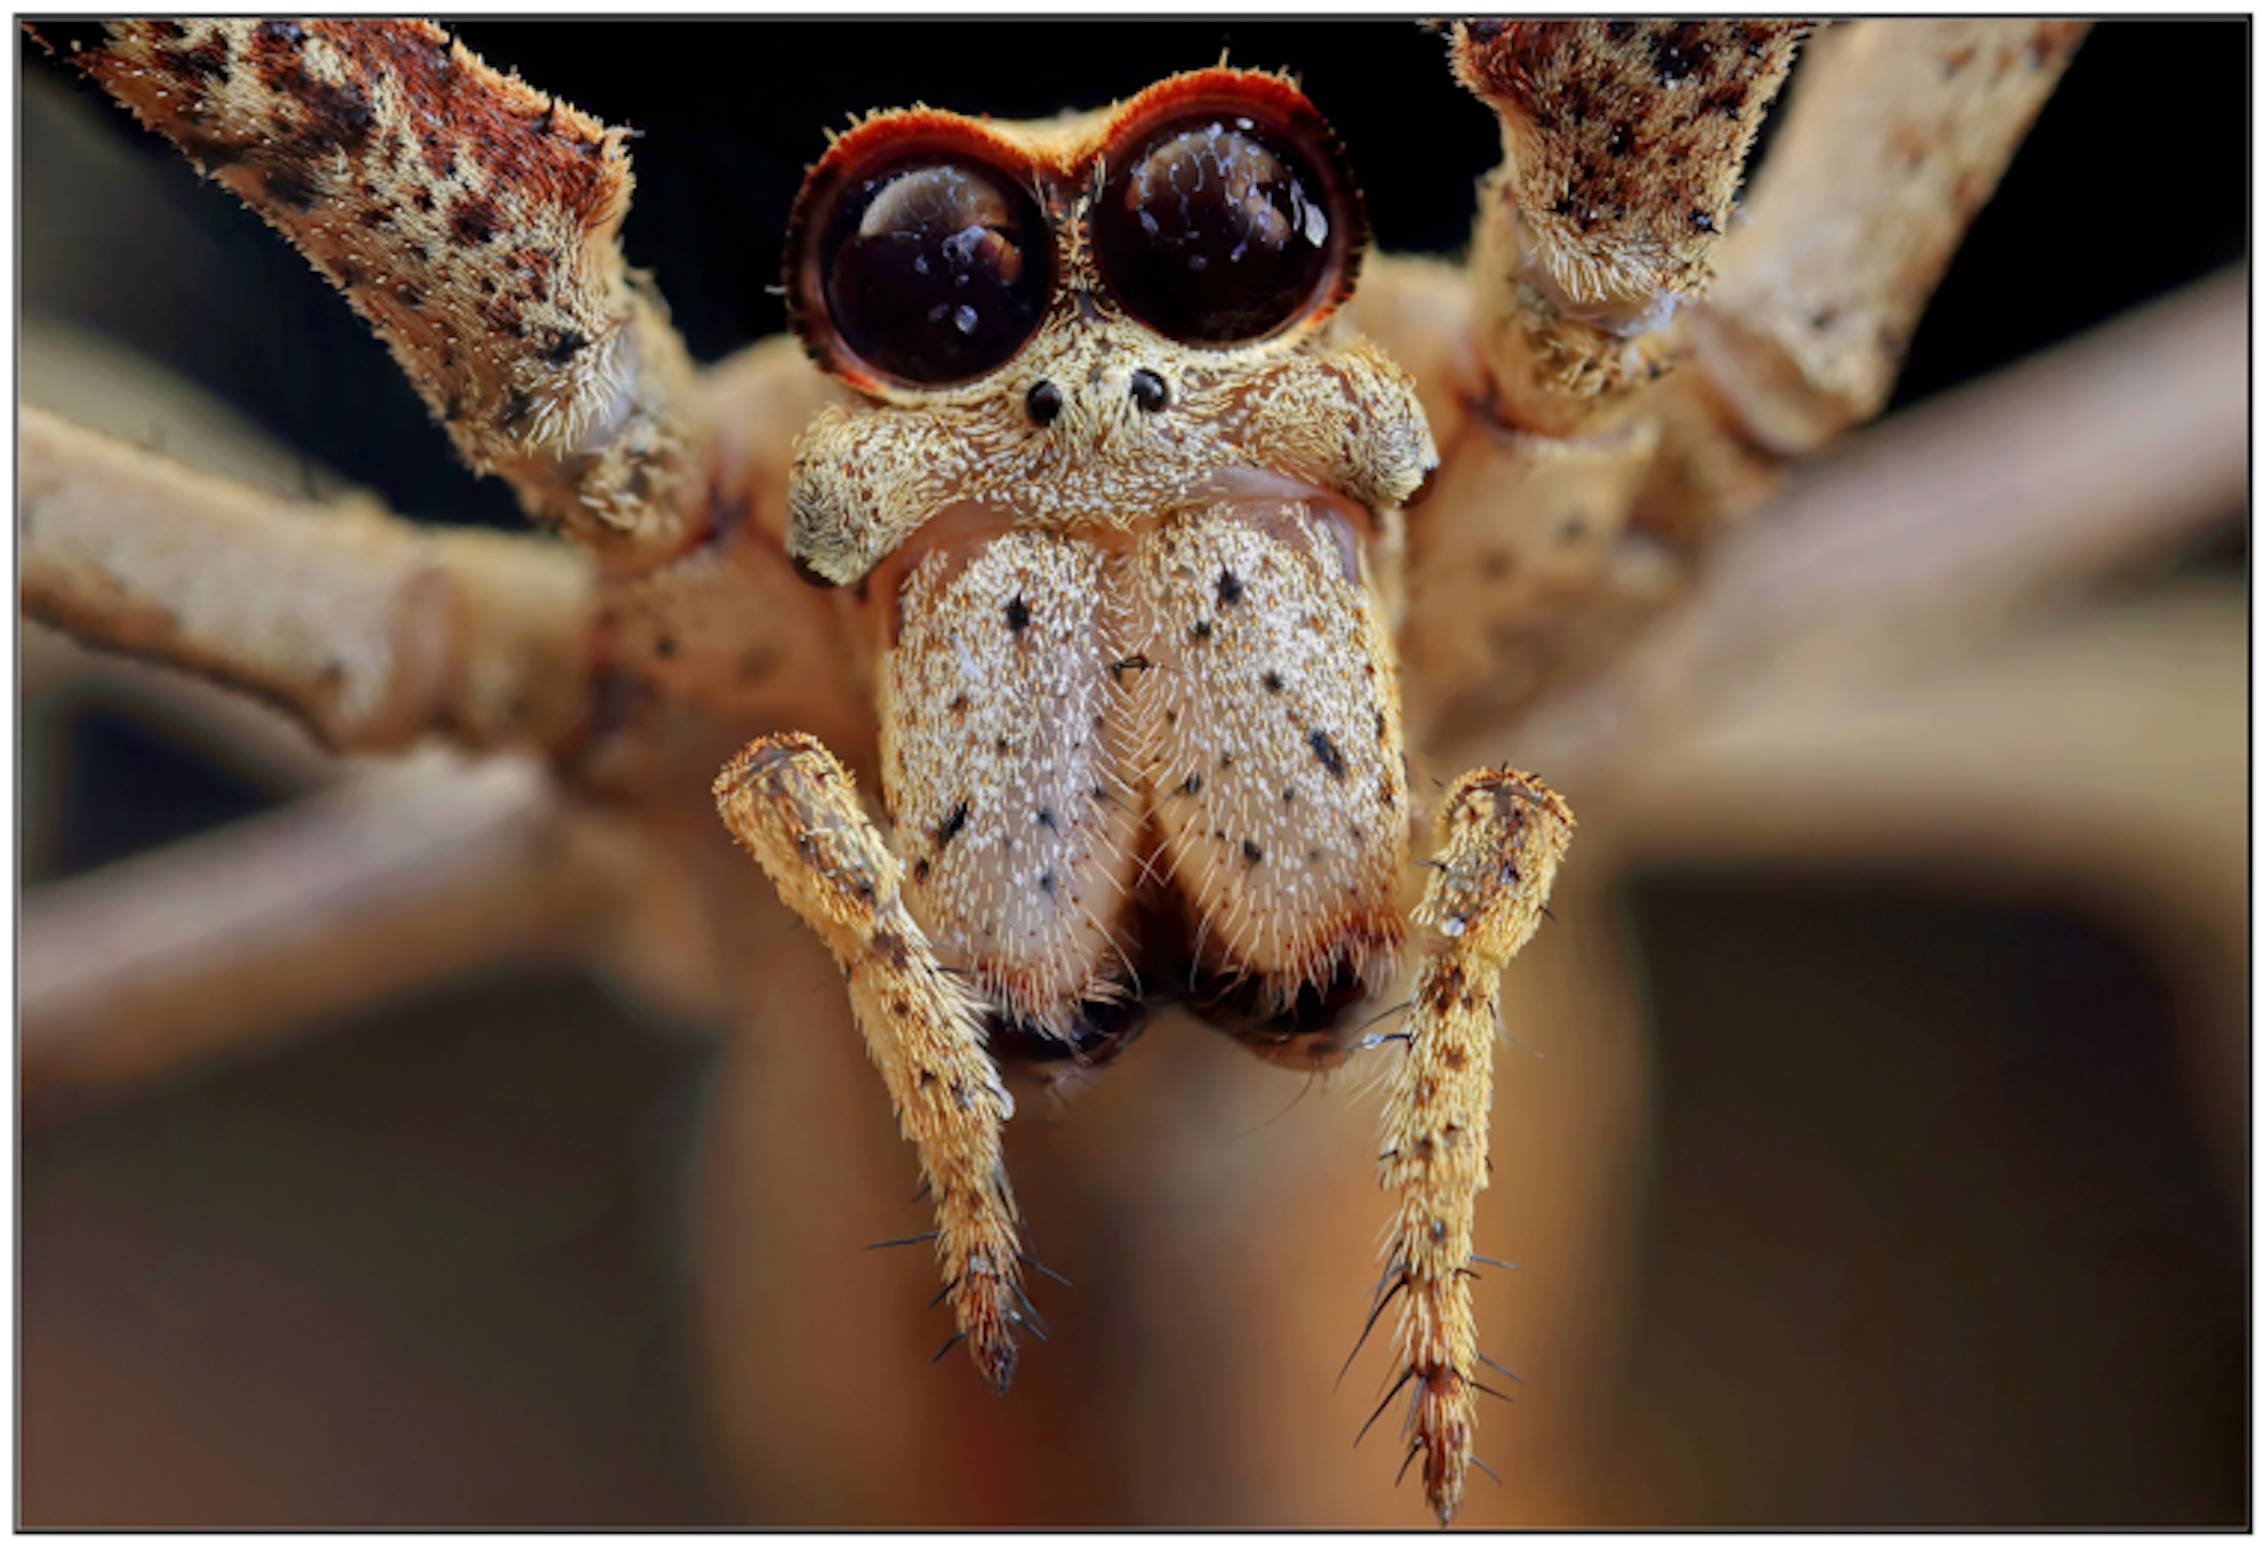 curious-kids-why-do-spiders-need-so-many-eyes-but-we-only-need-two